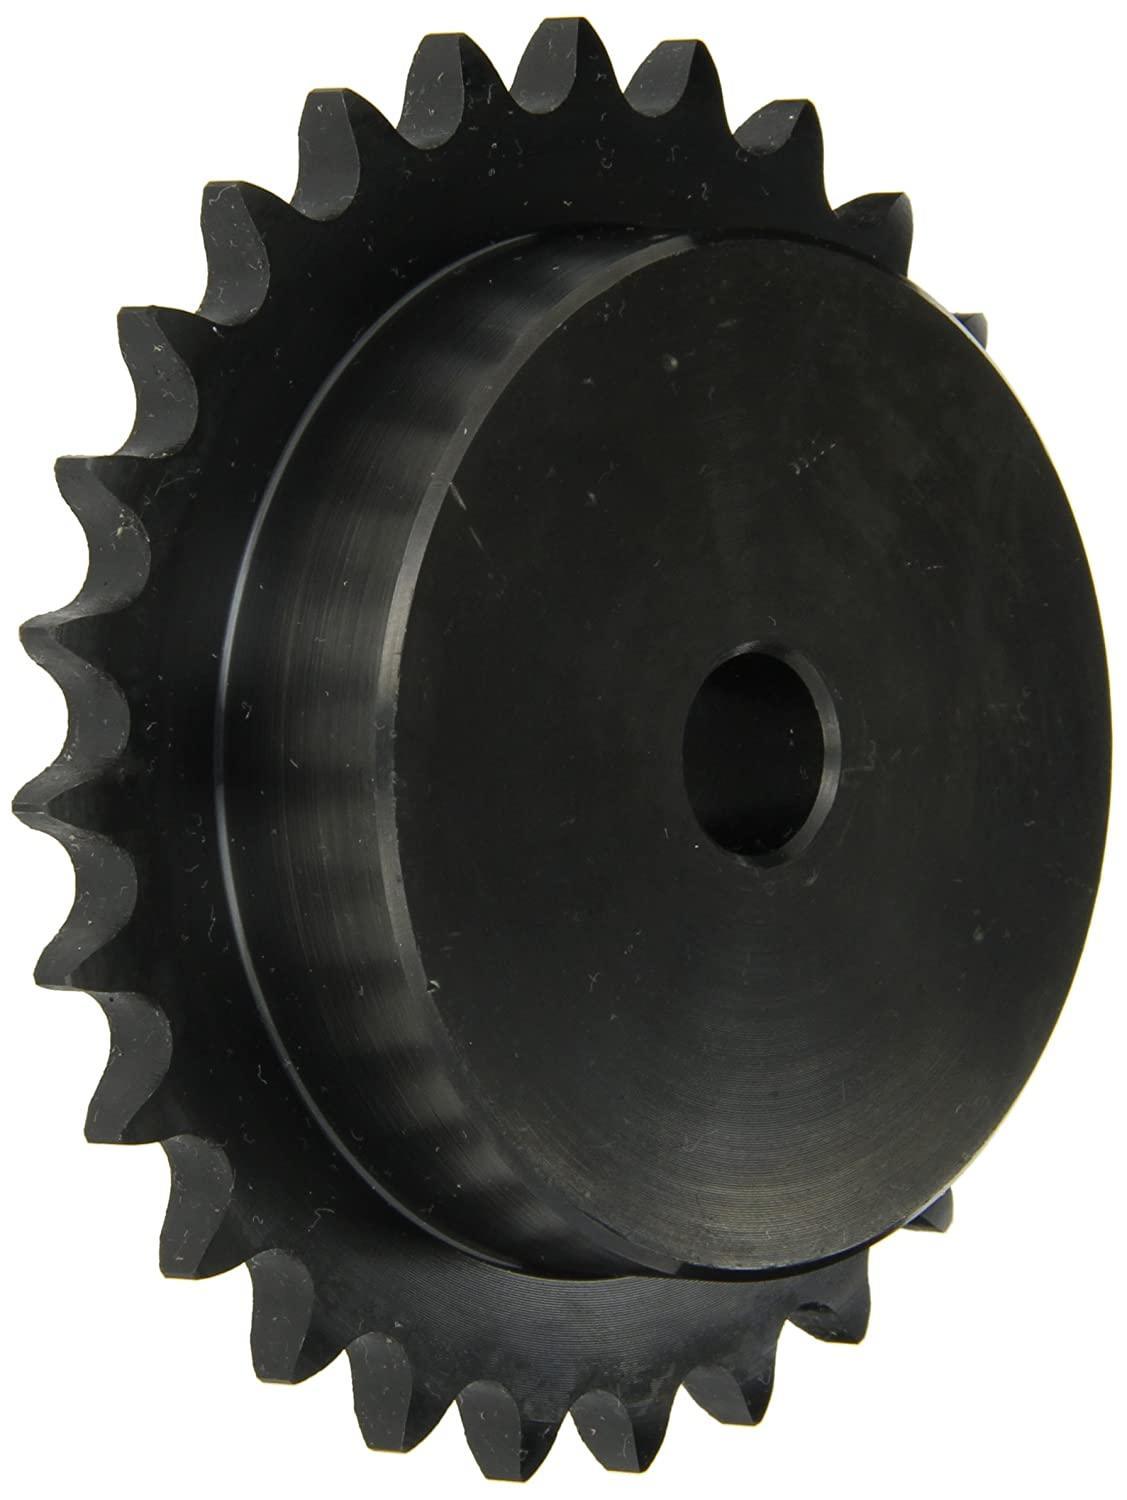 25B17 Roller Chain Sprocket With Stock Bore - Forces Inc